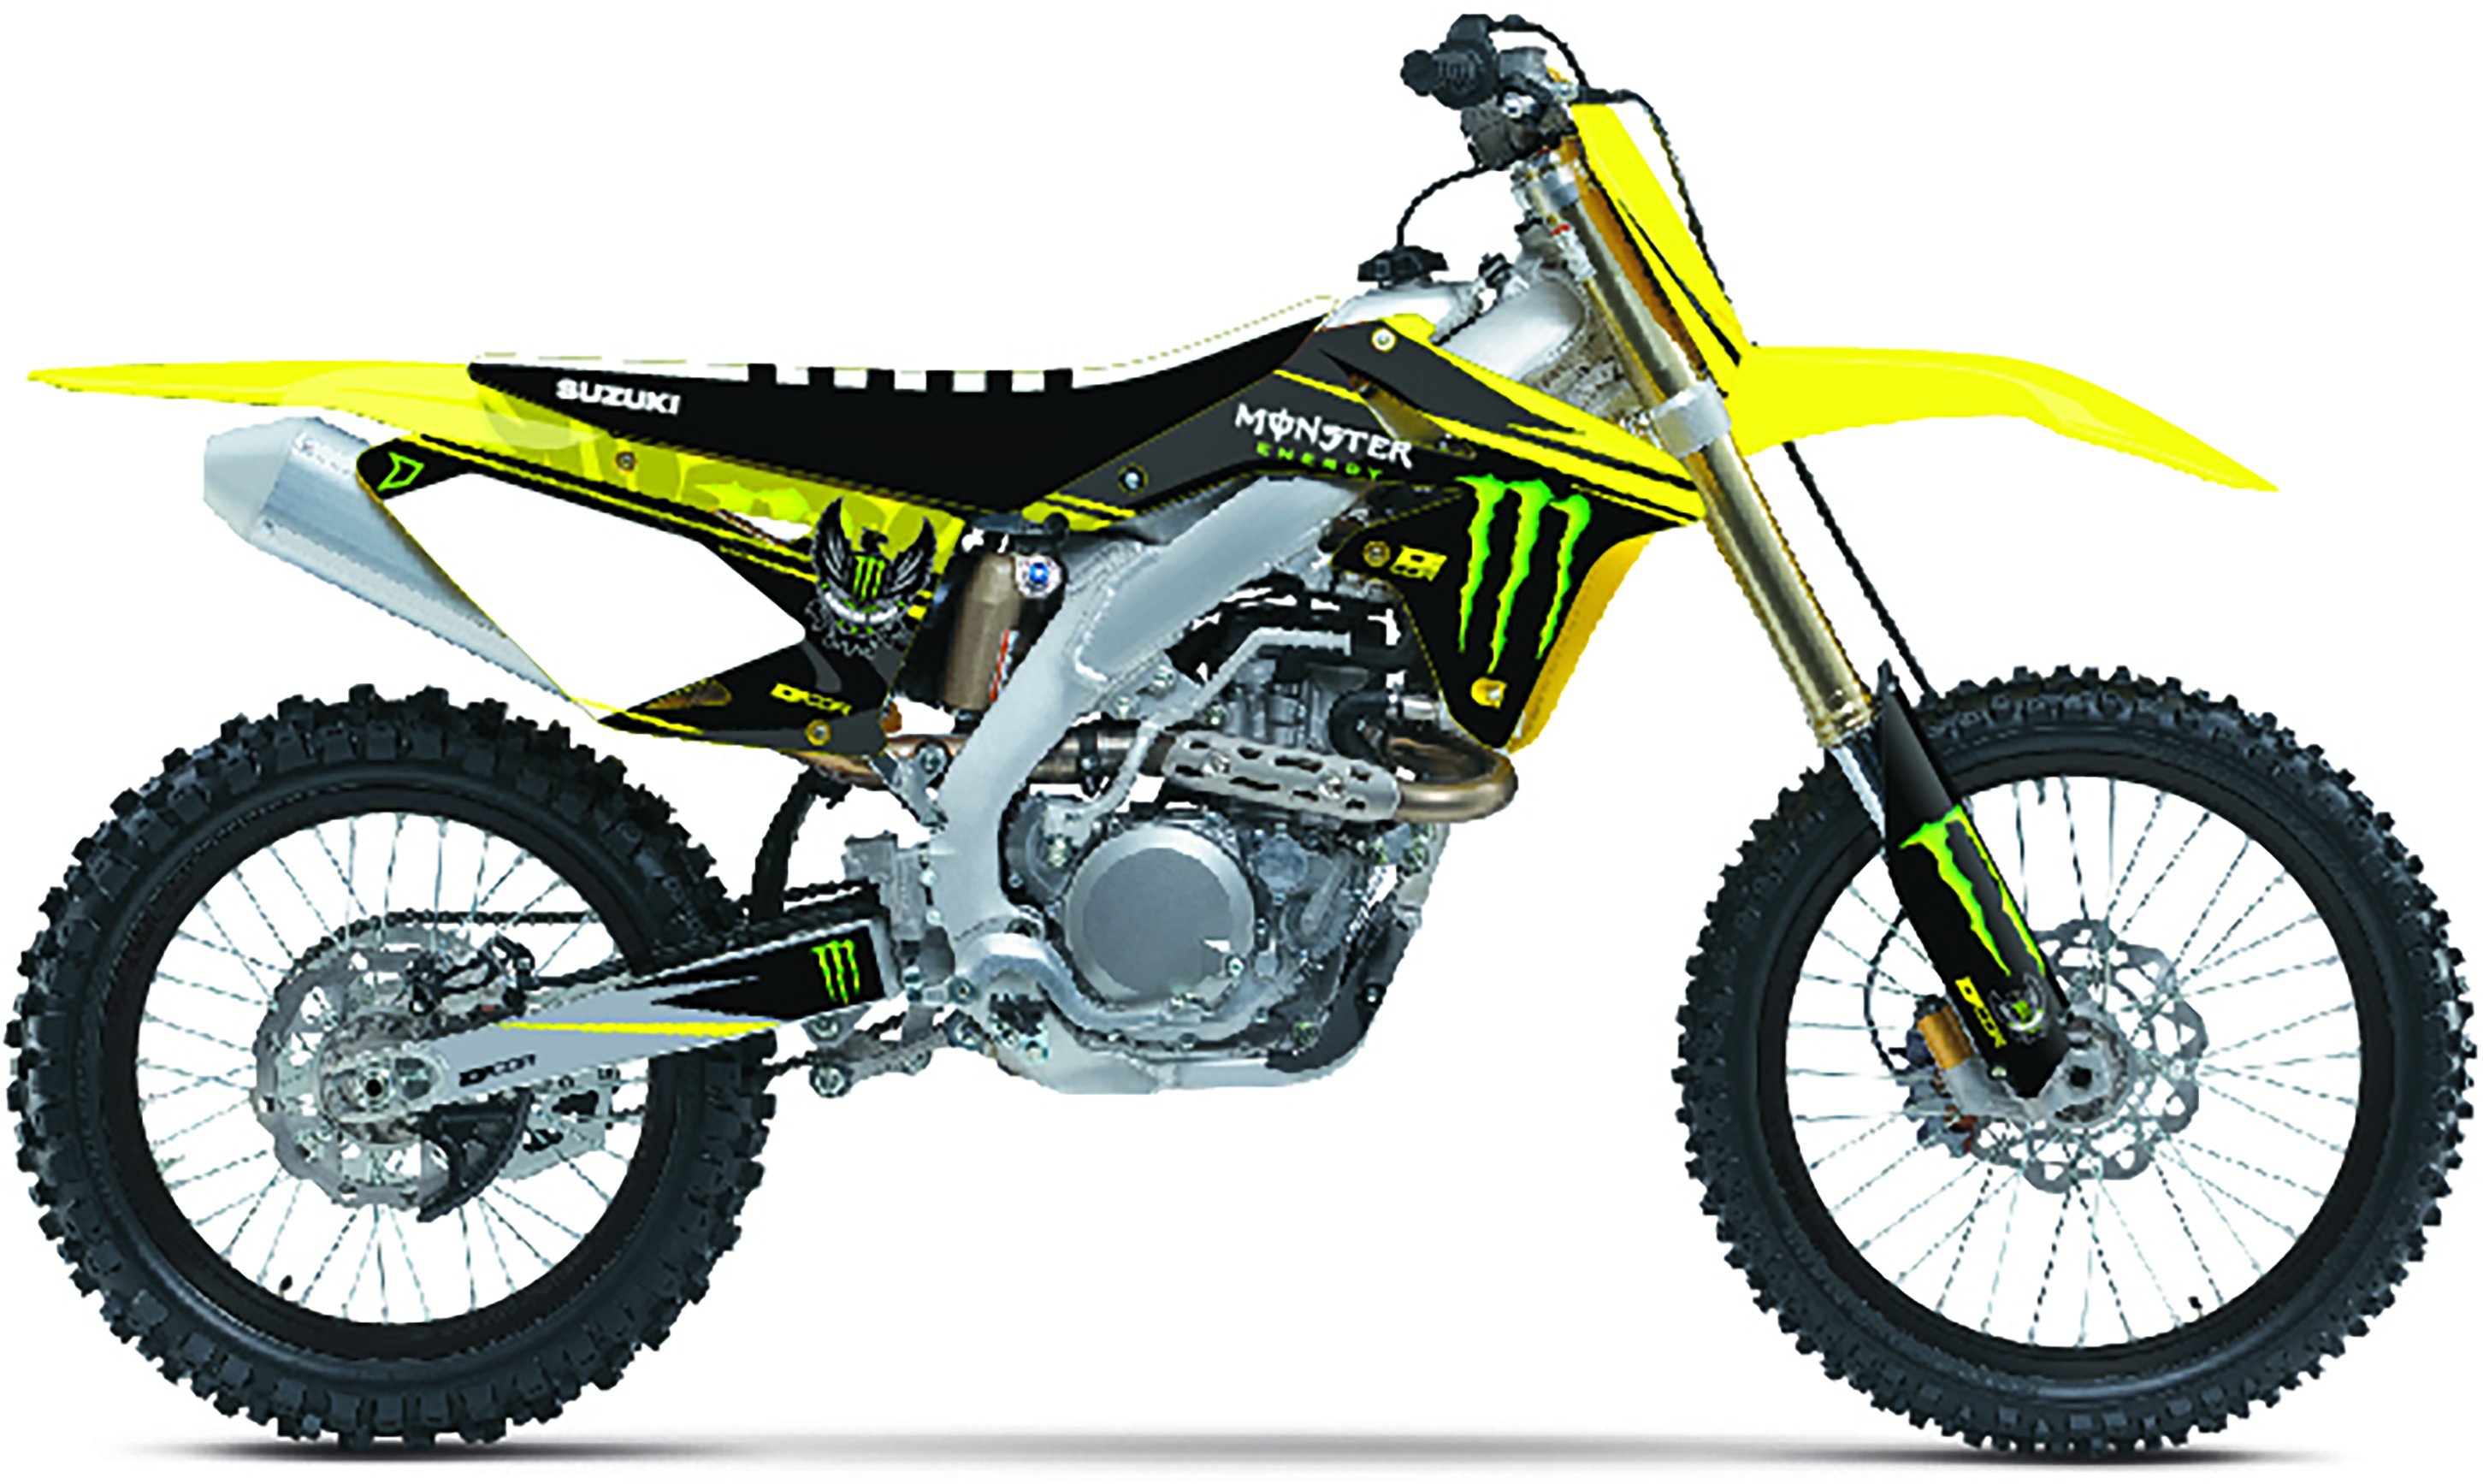 Monster Energy Complete Graphics Kit White - For 08-17 RMZ450 - Click Image to Close